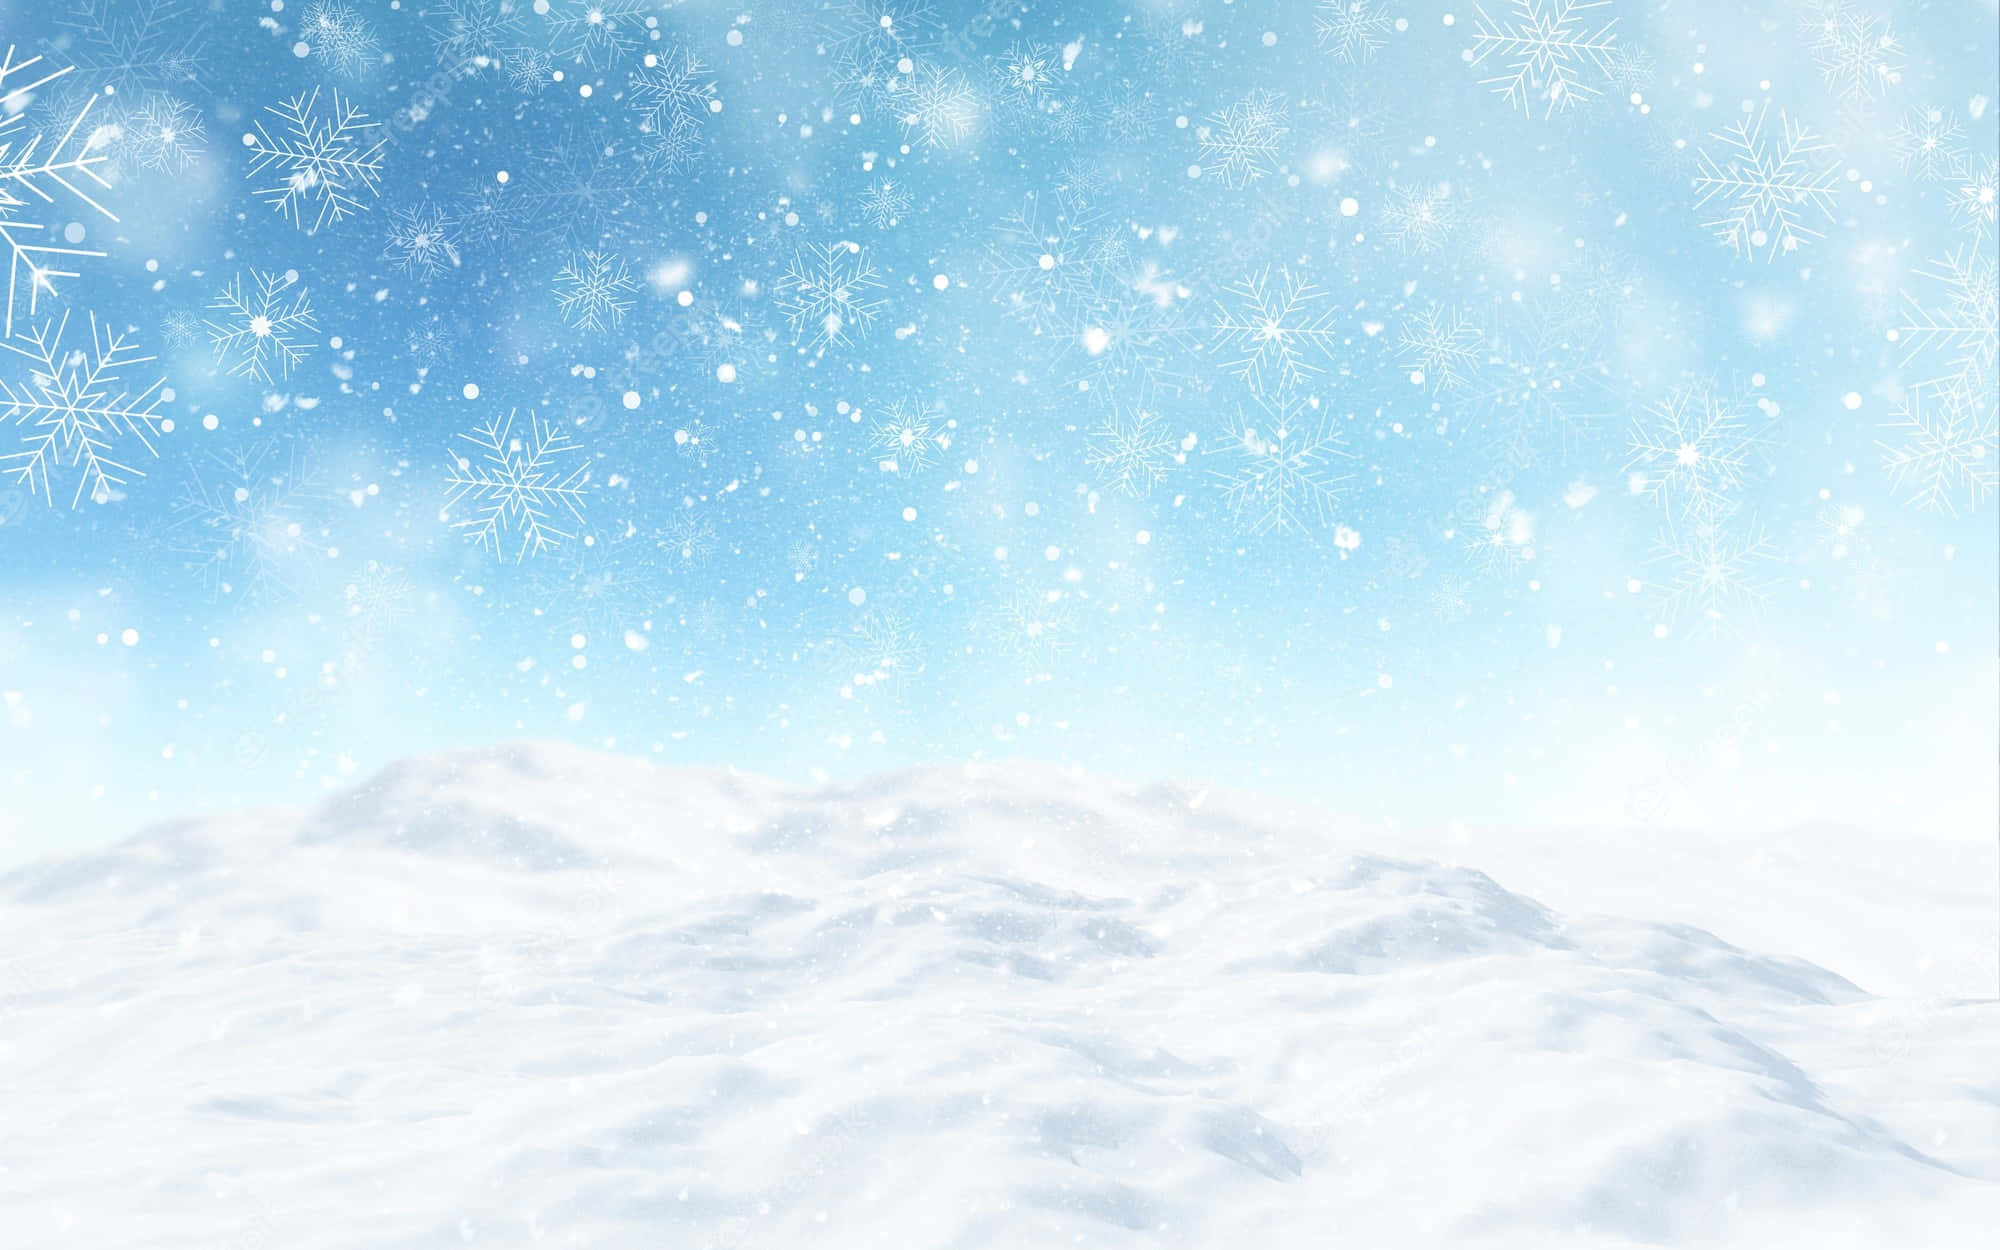 Snow Flakes And Filled Snow Surface Background